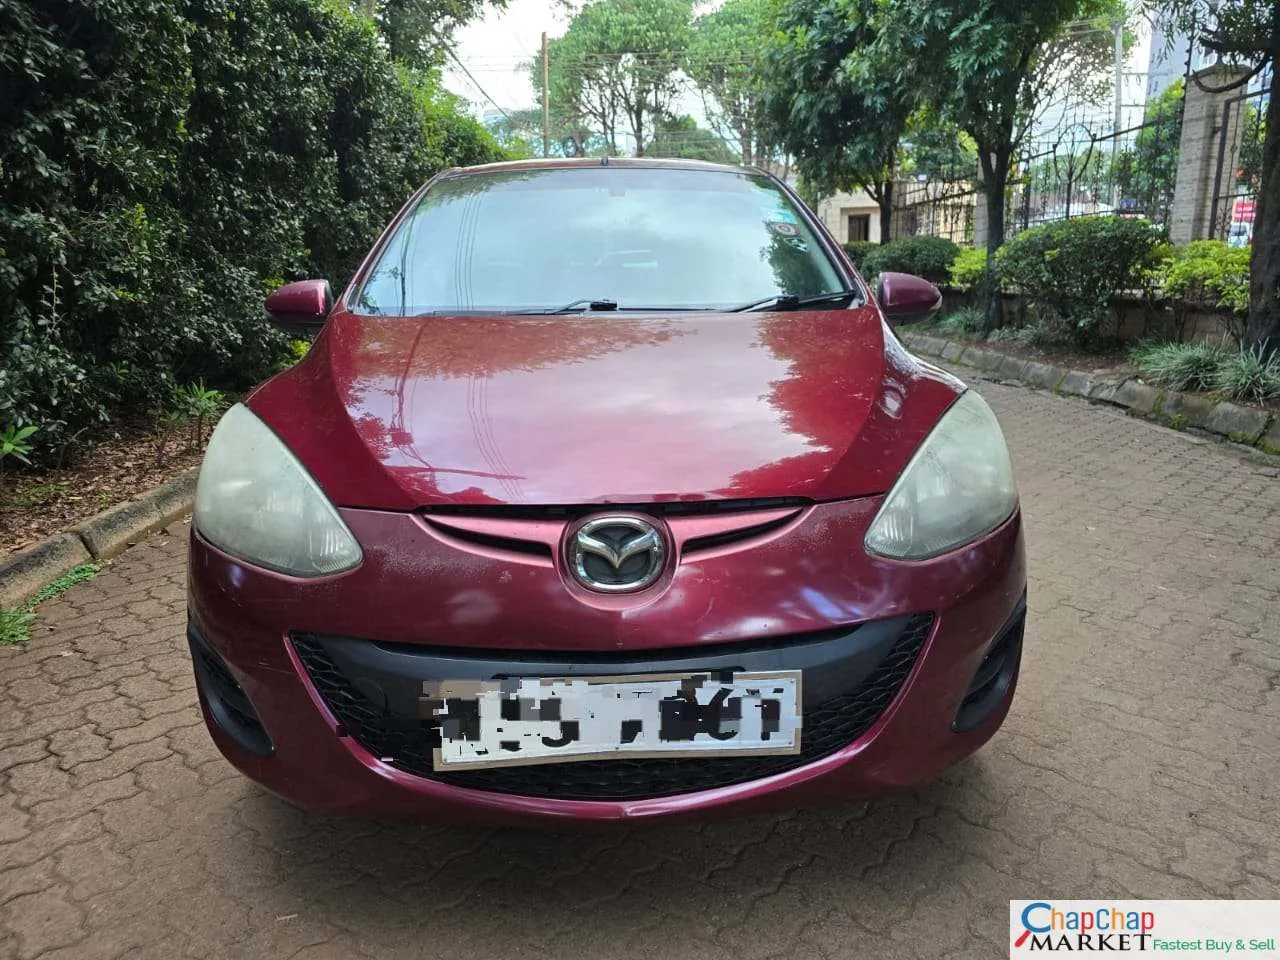 Mazda Demio QUICK SALE 🔥 You Pay 30% DEPOSIT TRADE IN OK EXCLUSIVE hire purchase installments